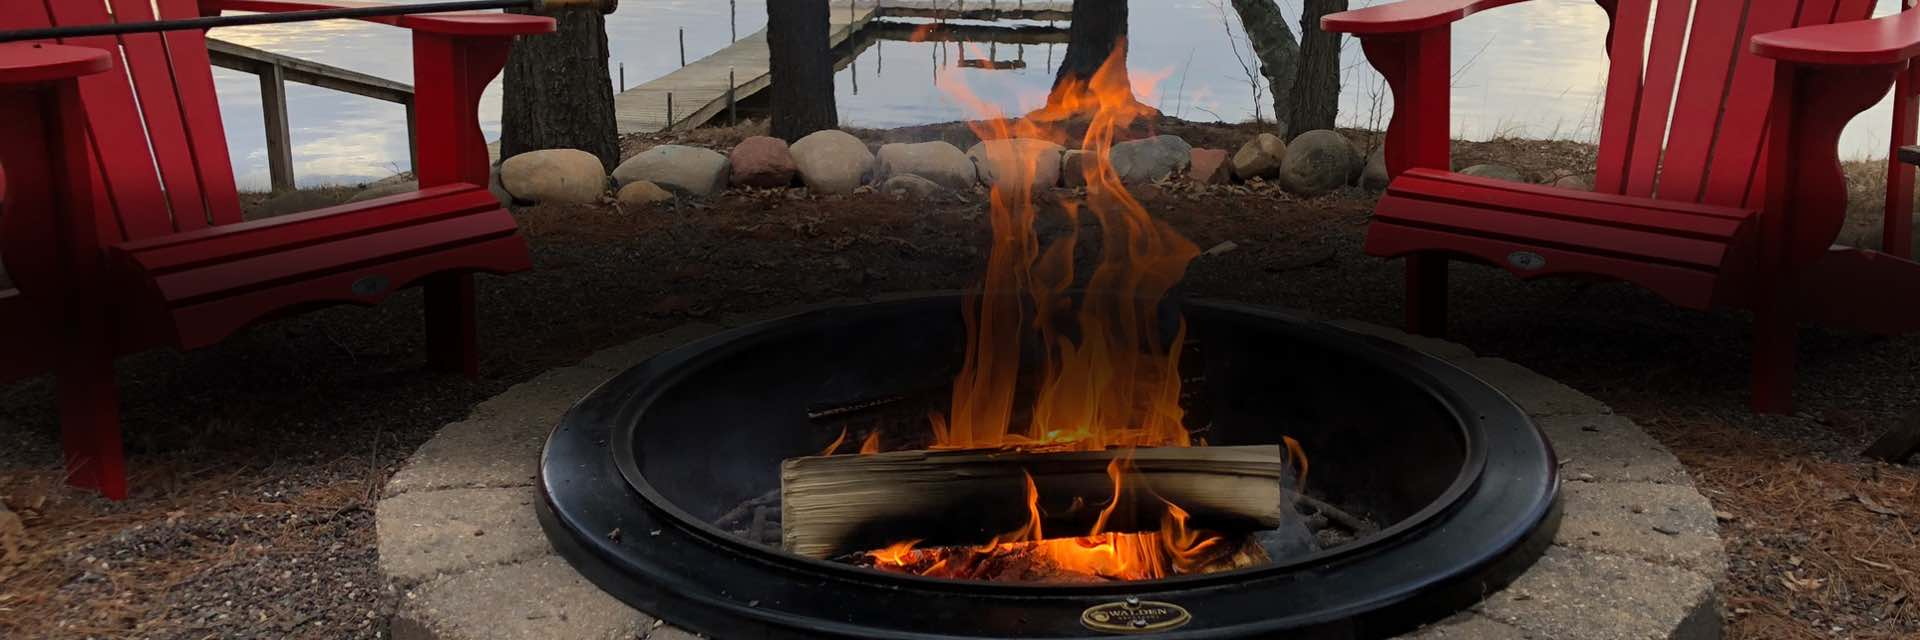 Roaring fire inside a lakeside fire pit with two lounge chairs behind.